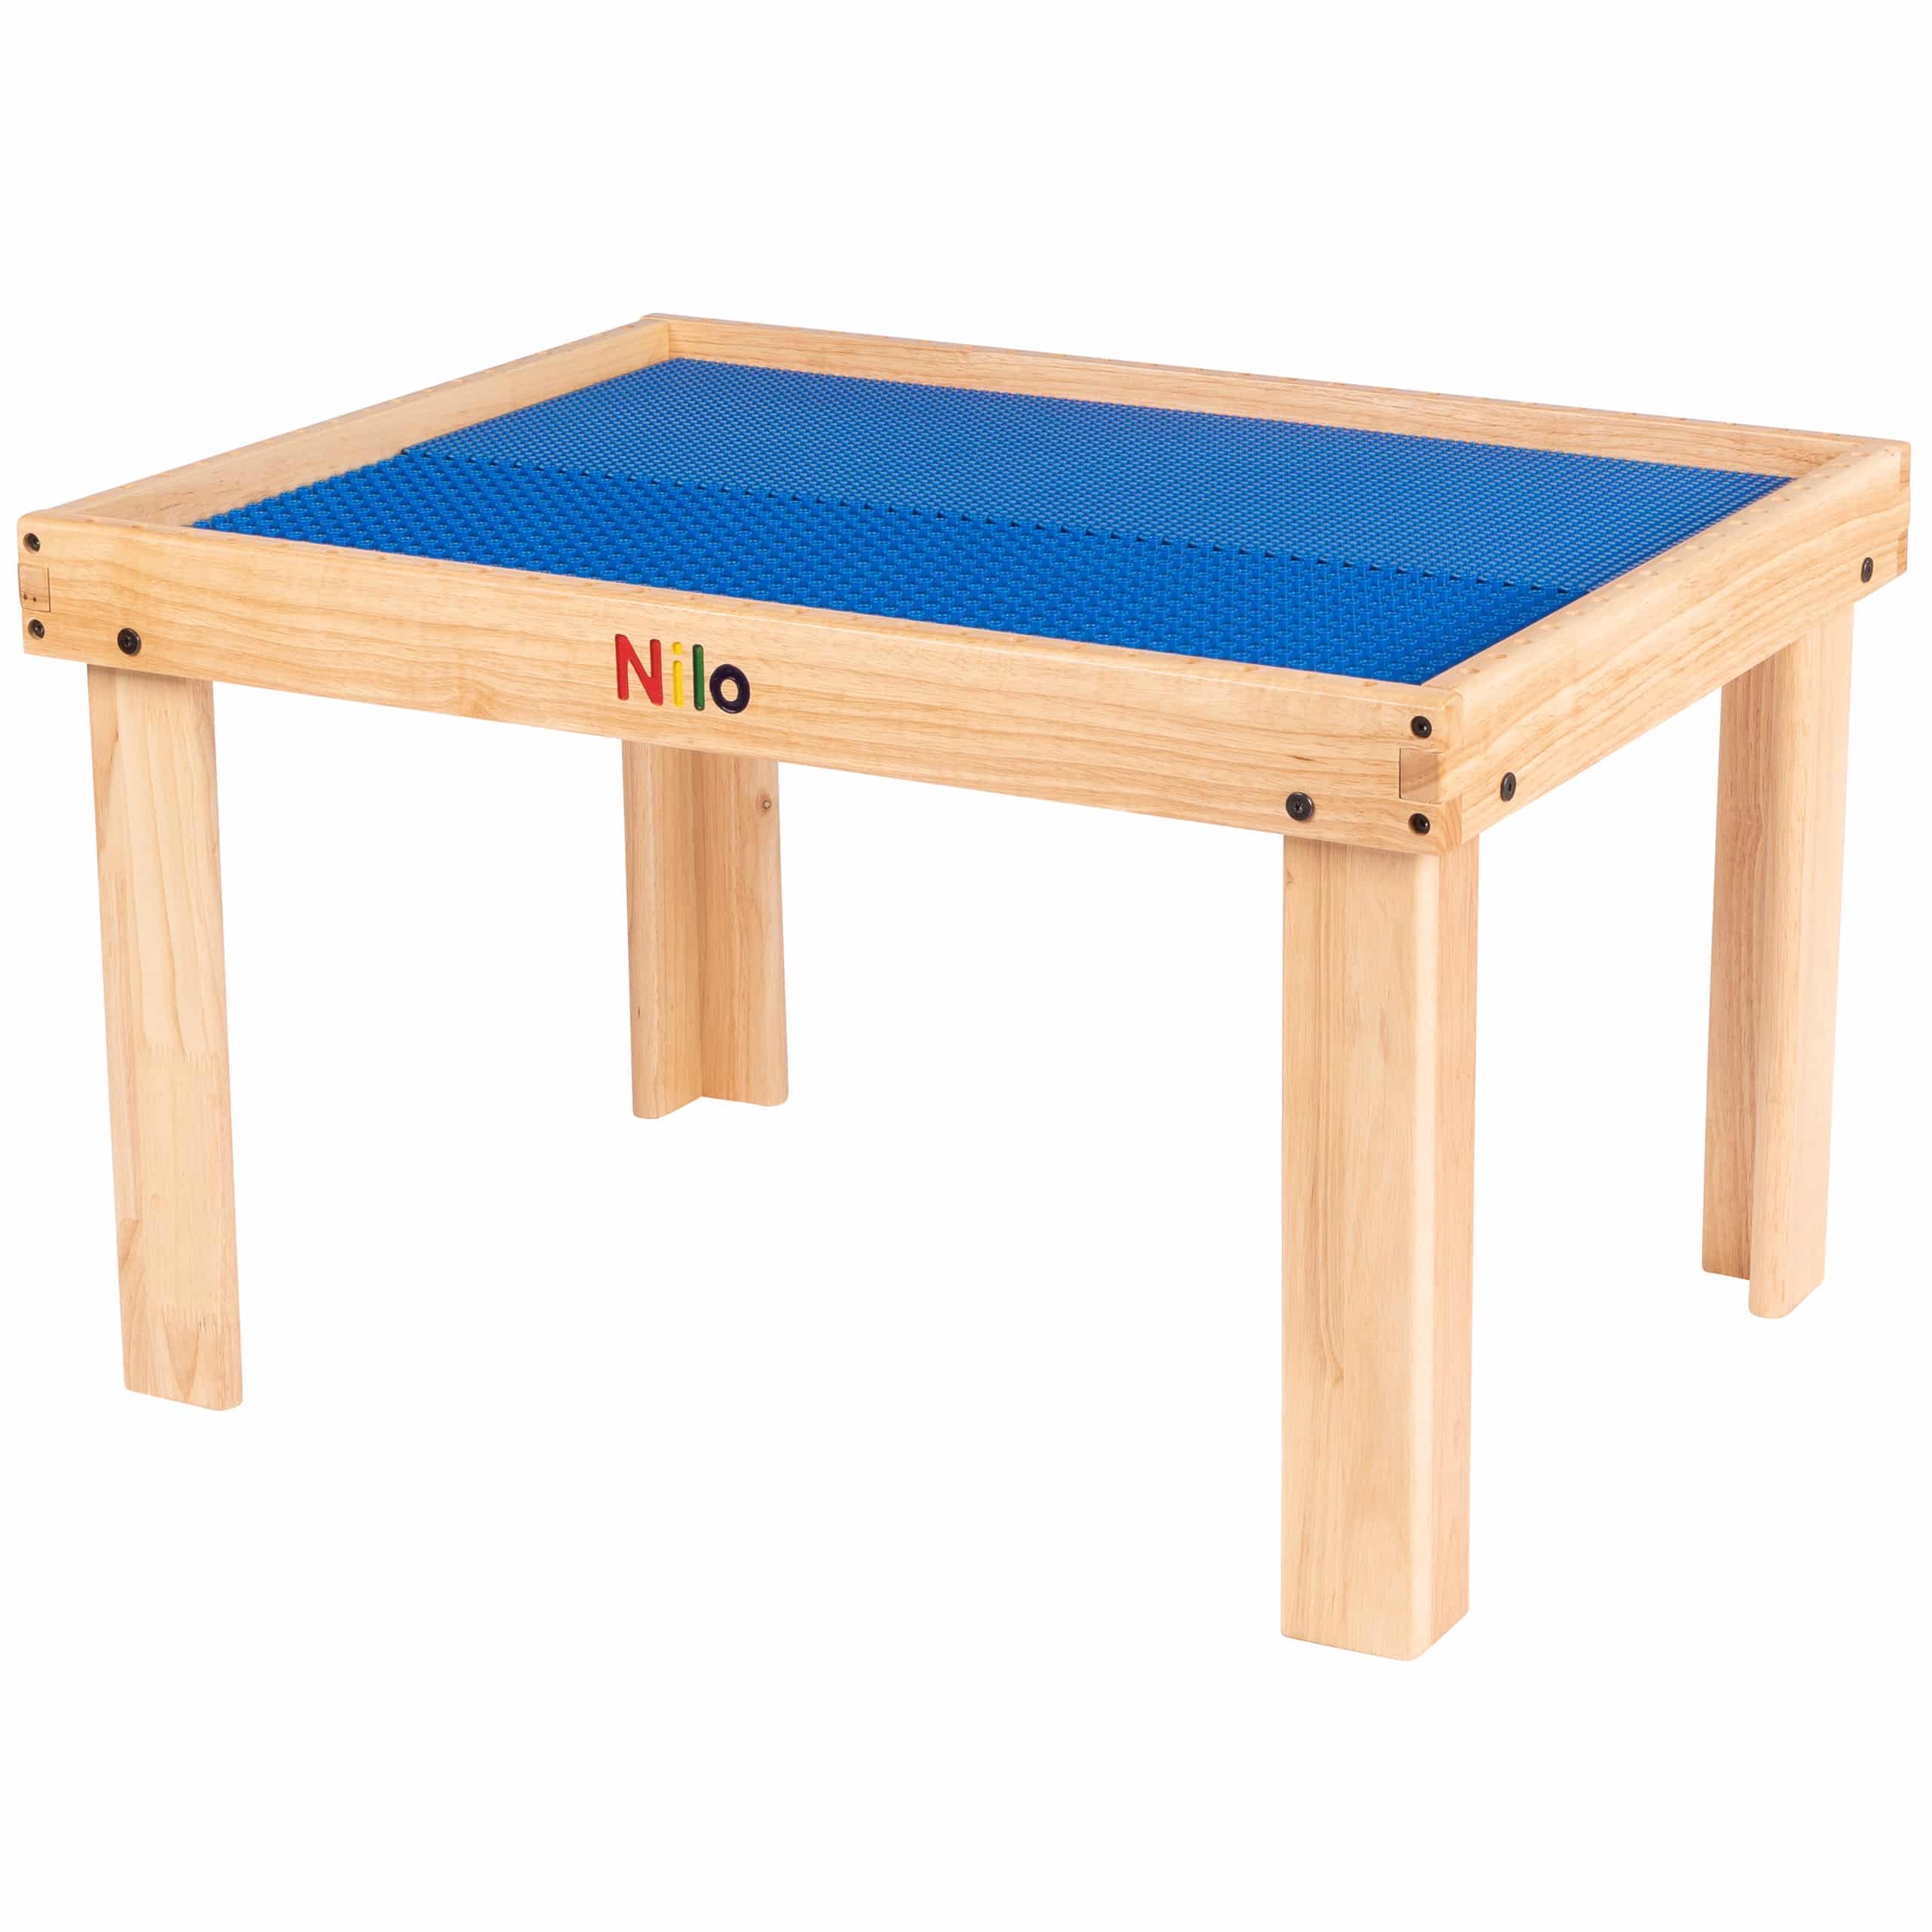 recessed tabletop and puzzle pieces on coffee tabler - Nilo Toys